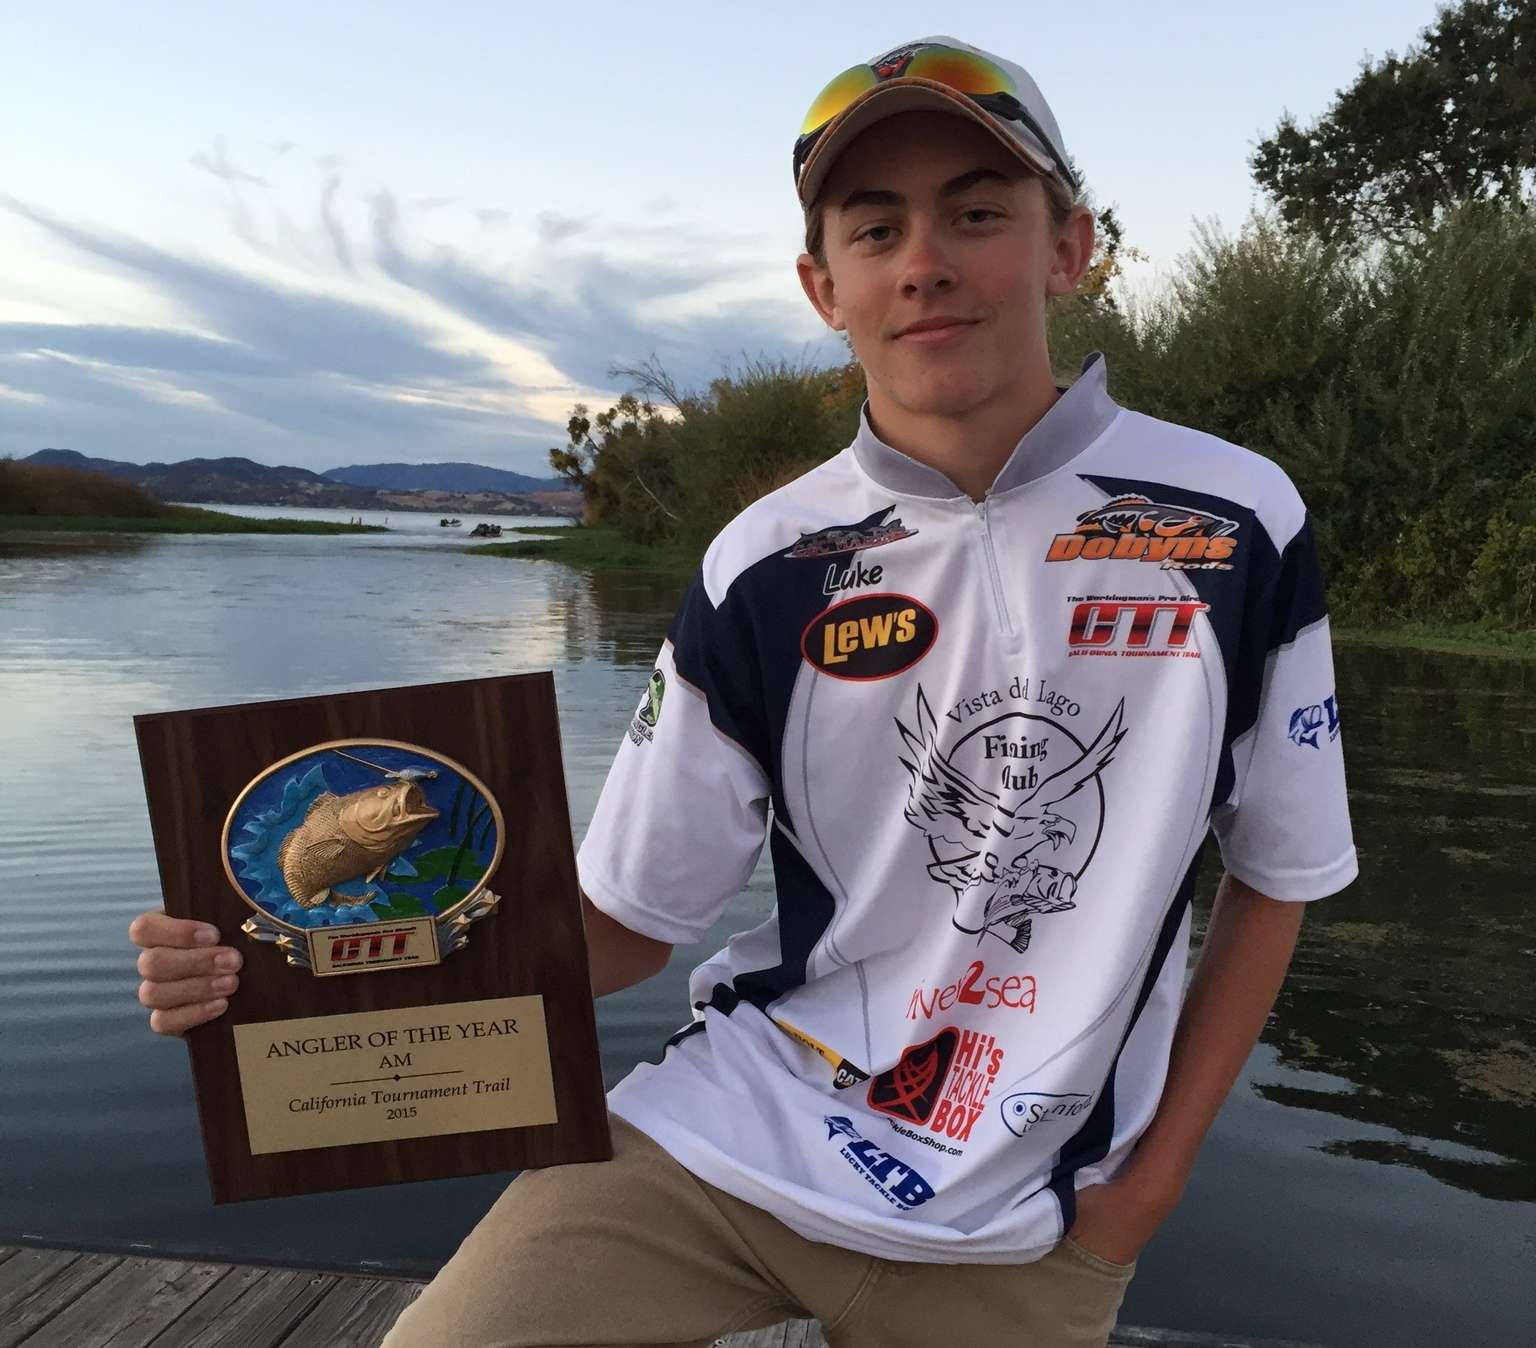 <b>California: Luke Johns</b><br>
Johns is a junior at Vista Del Lago High School in Folsom, Calif. He has four Top 5 finishes from tournament around the state including such fisheries as the California Delta and Clear Lake.
